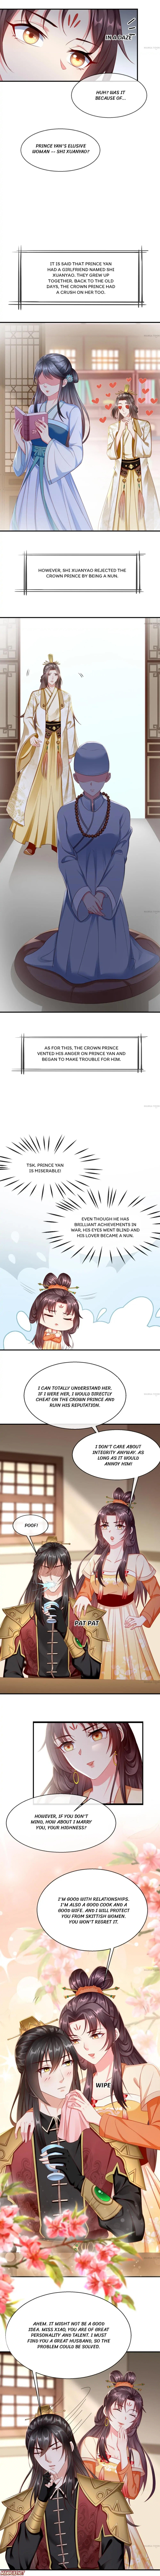 Why The Princess Acts Like White Lotus - Page 2